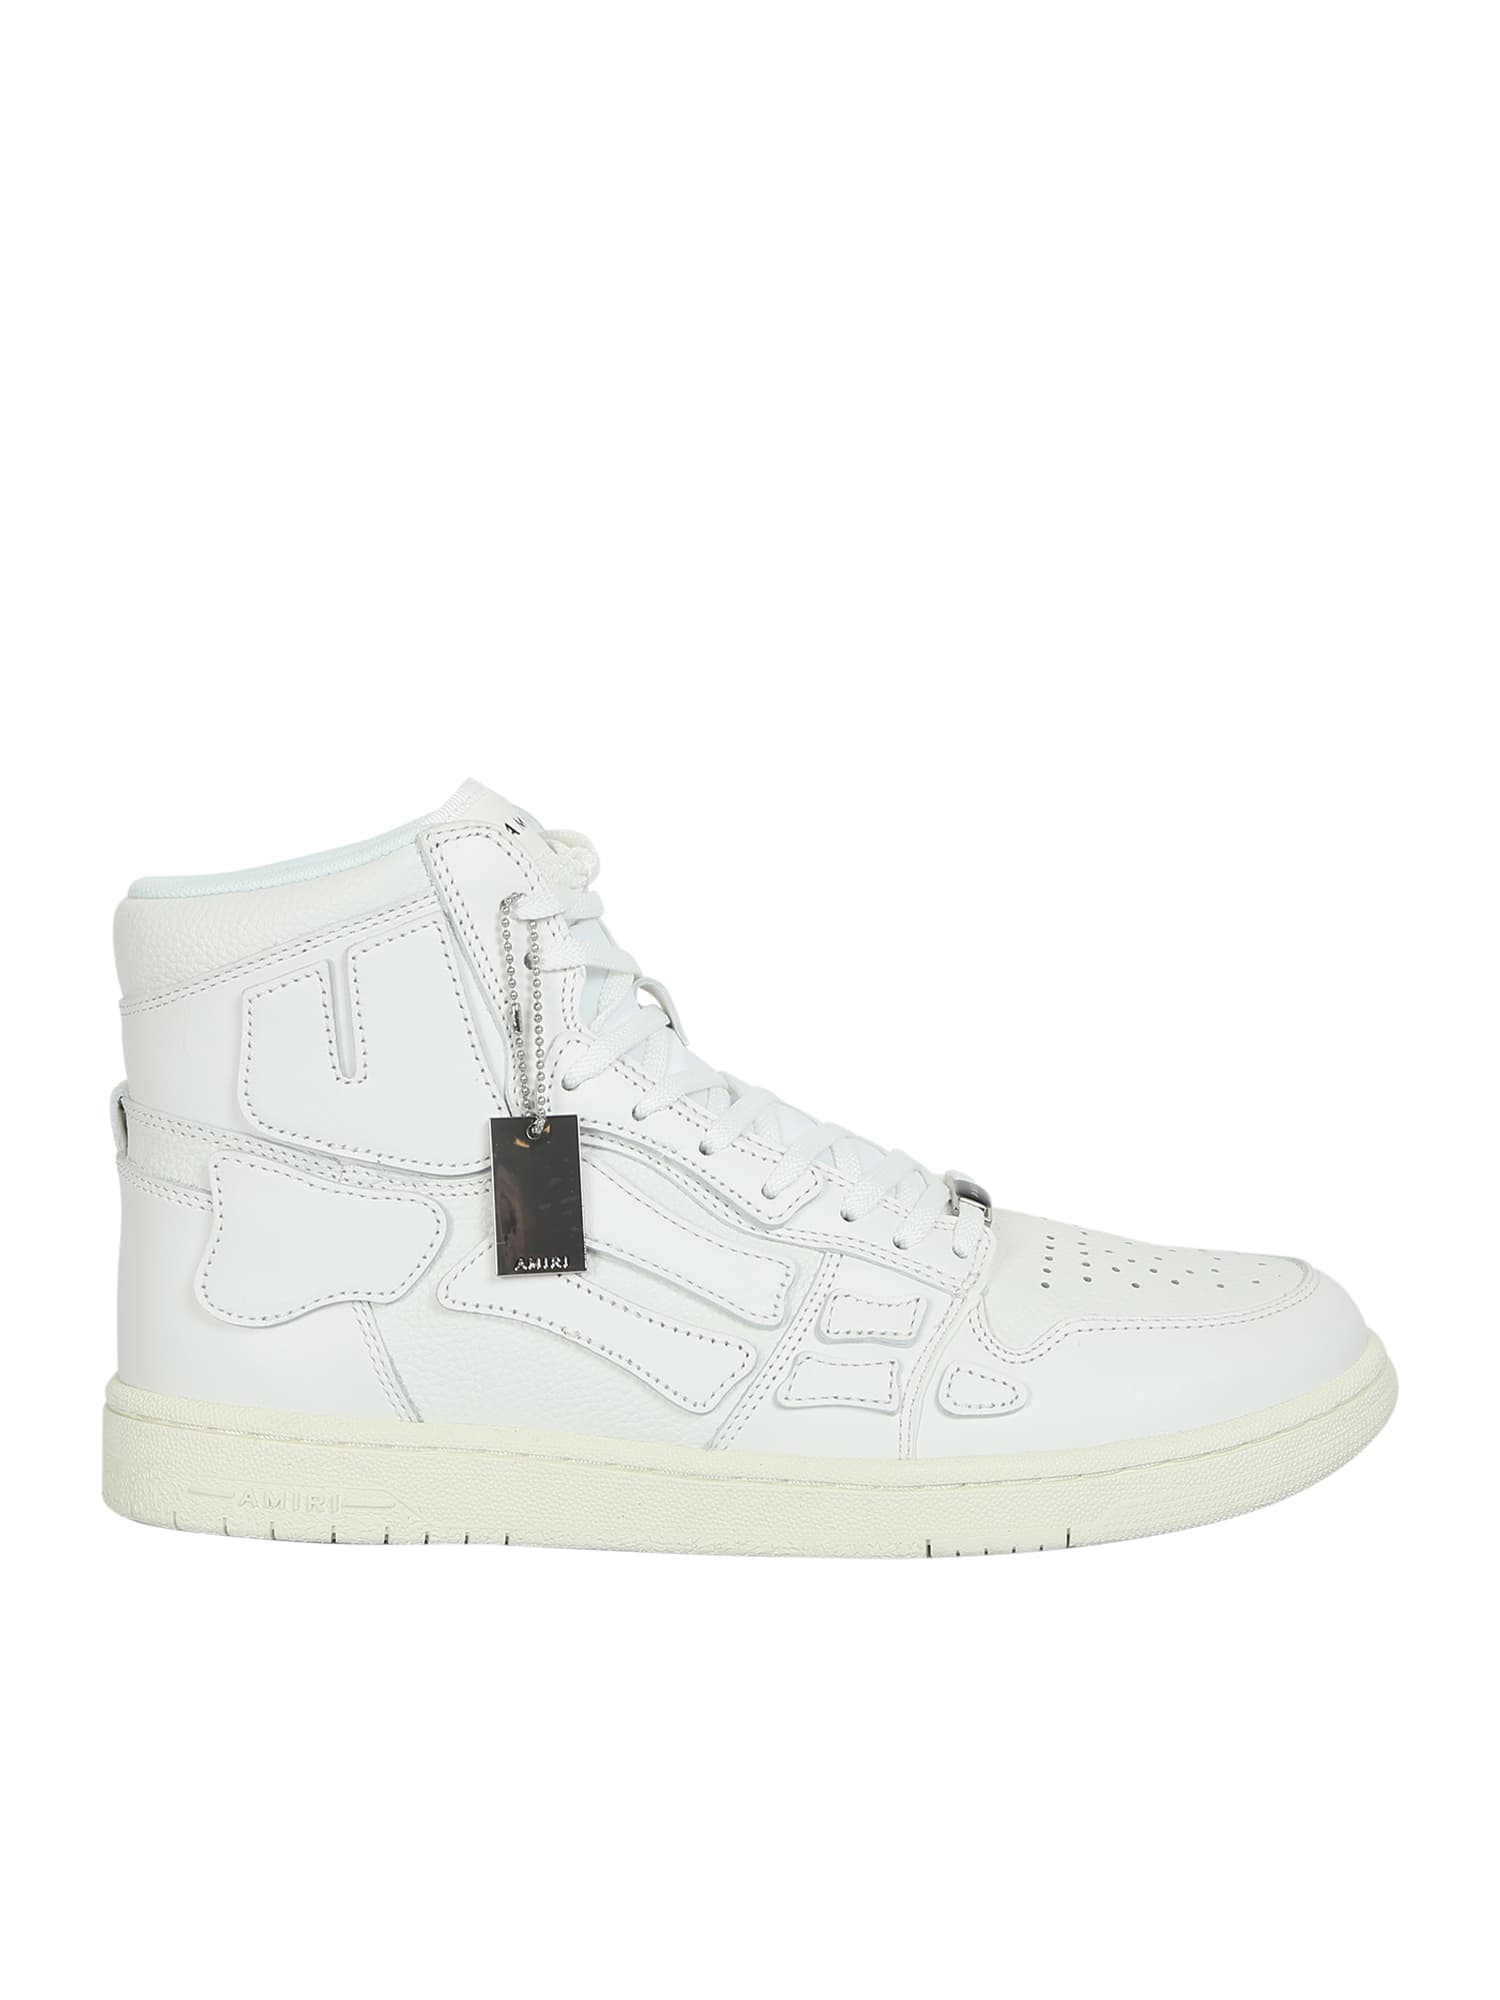 AMIRI Skel-top High Sneakers In Leather With Hand-cut Applications On The Sides